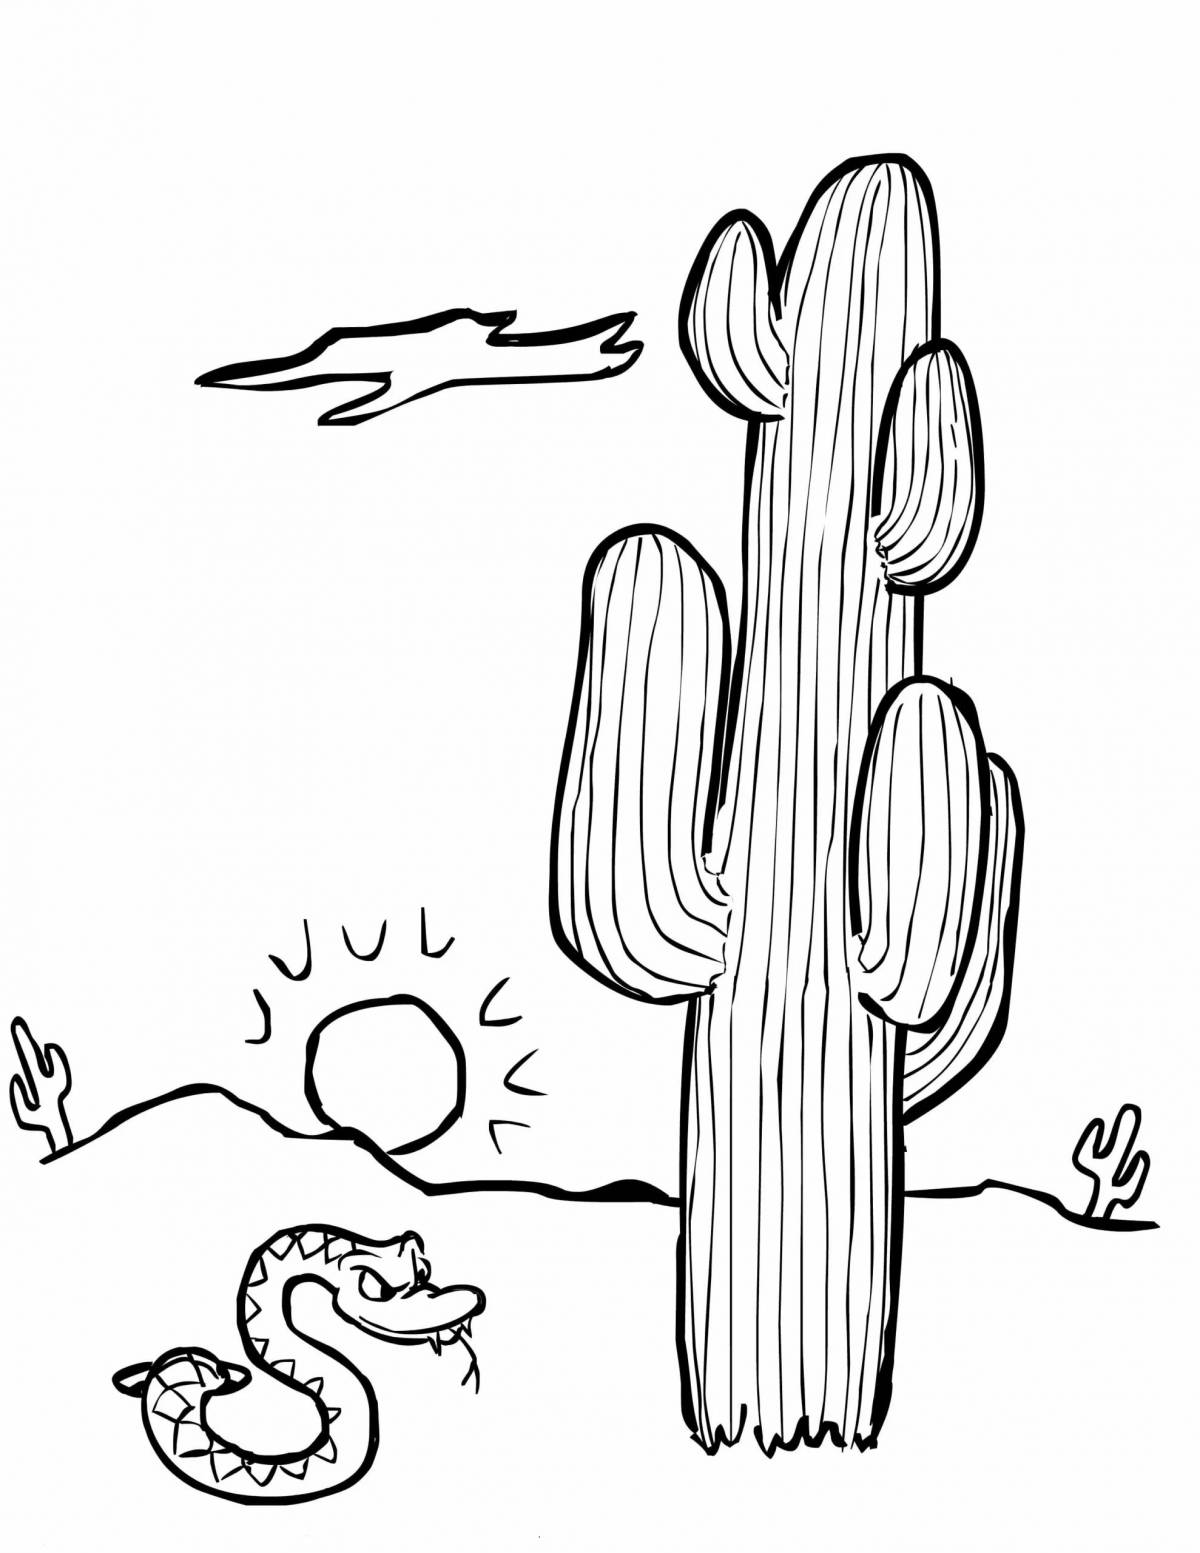 Colorful vibrant desert coloring page for kids